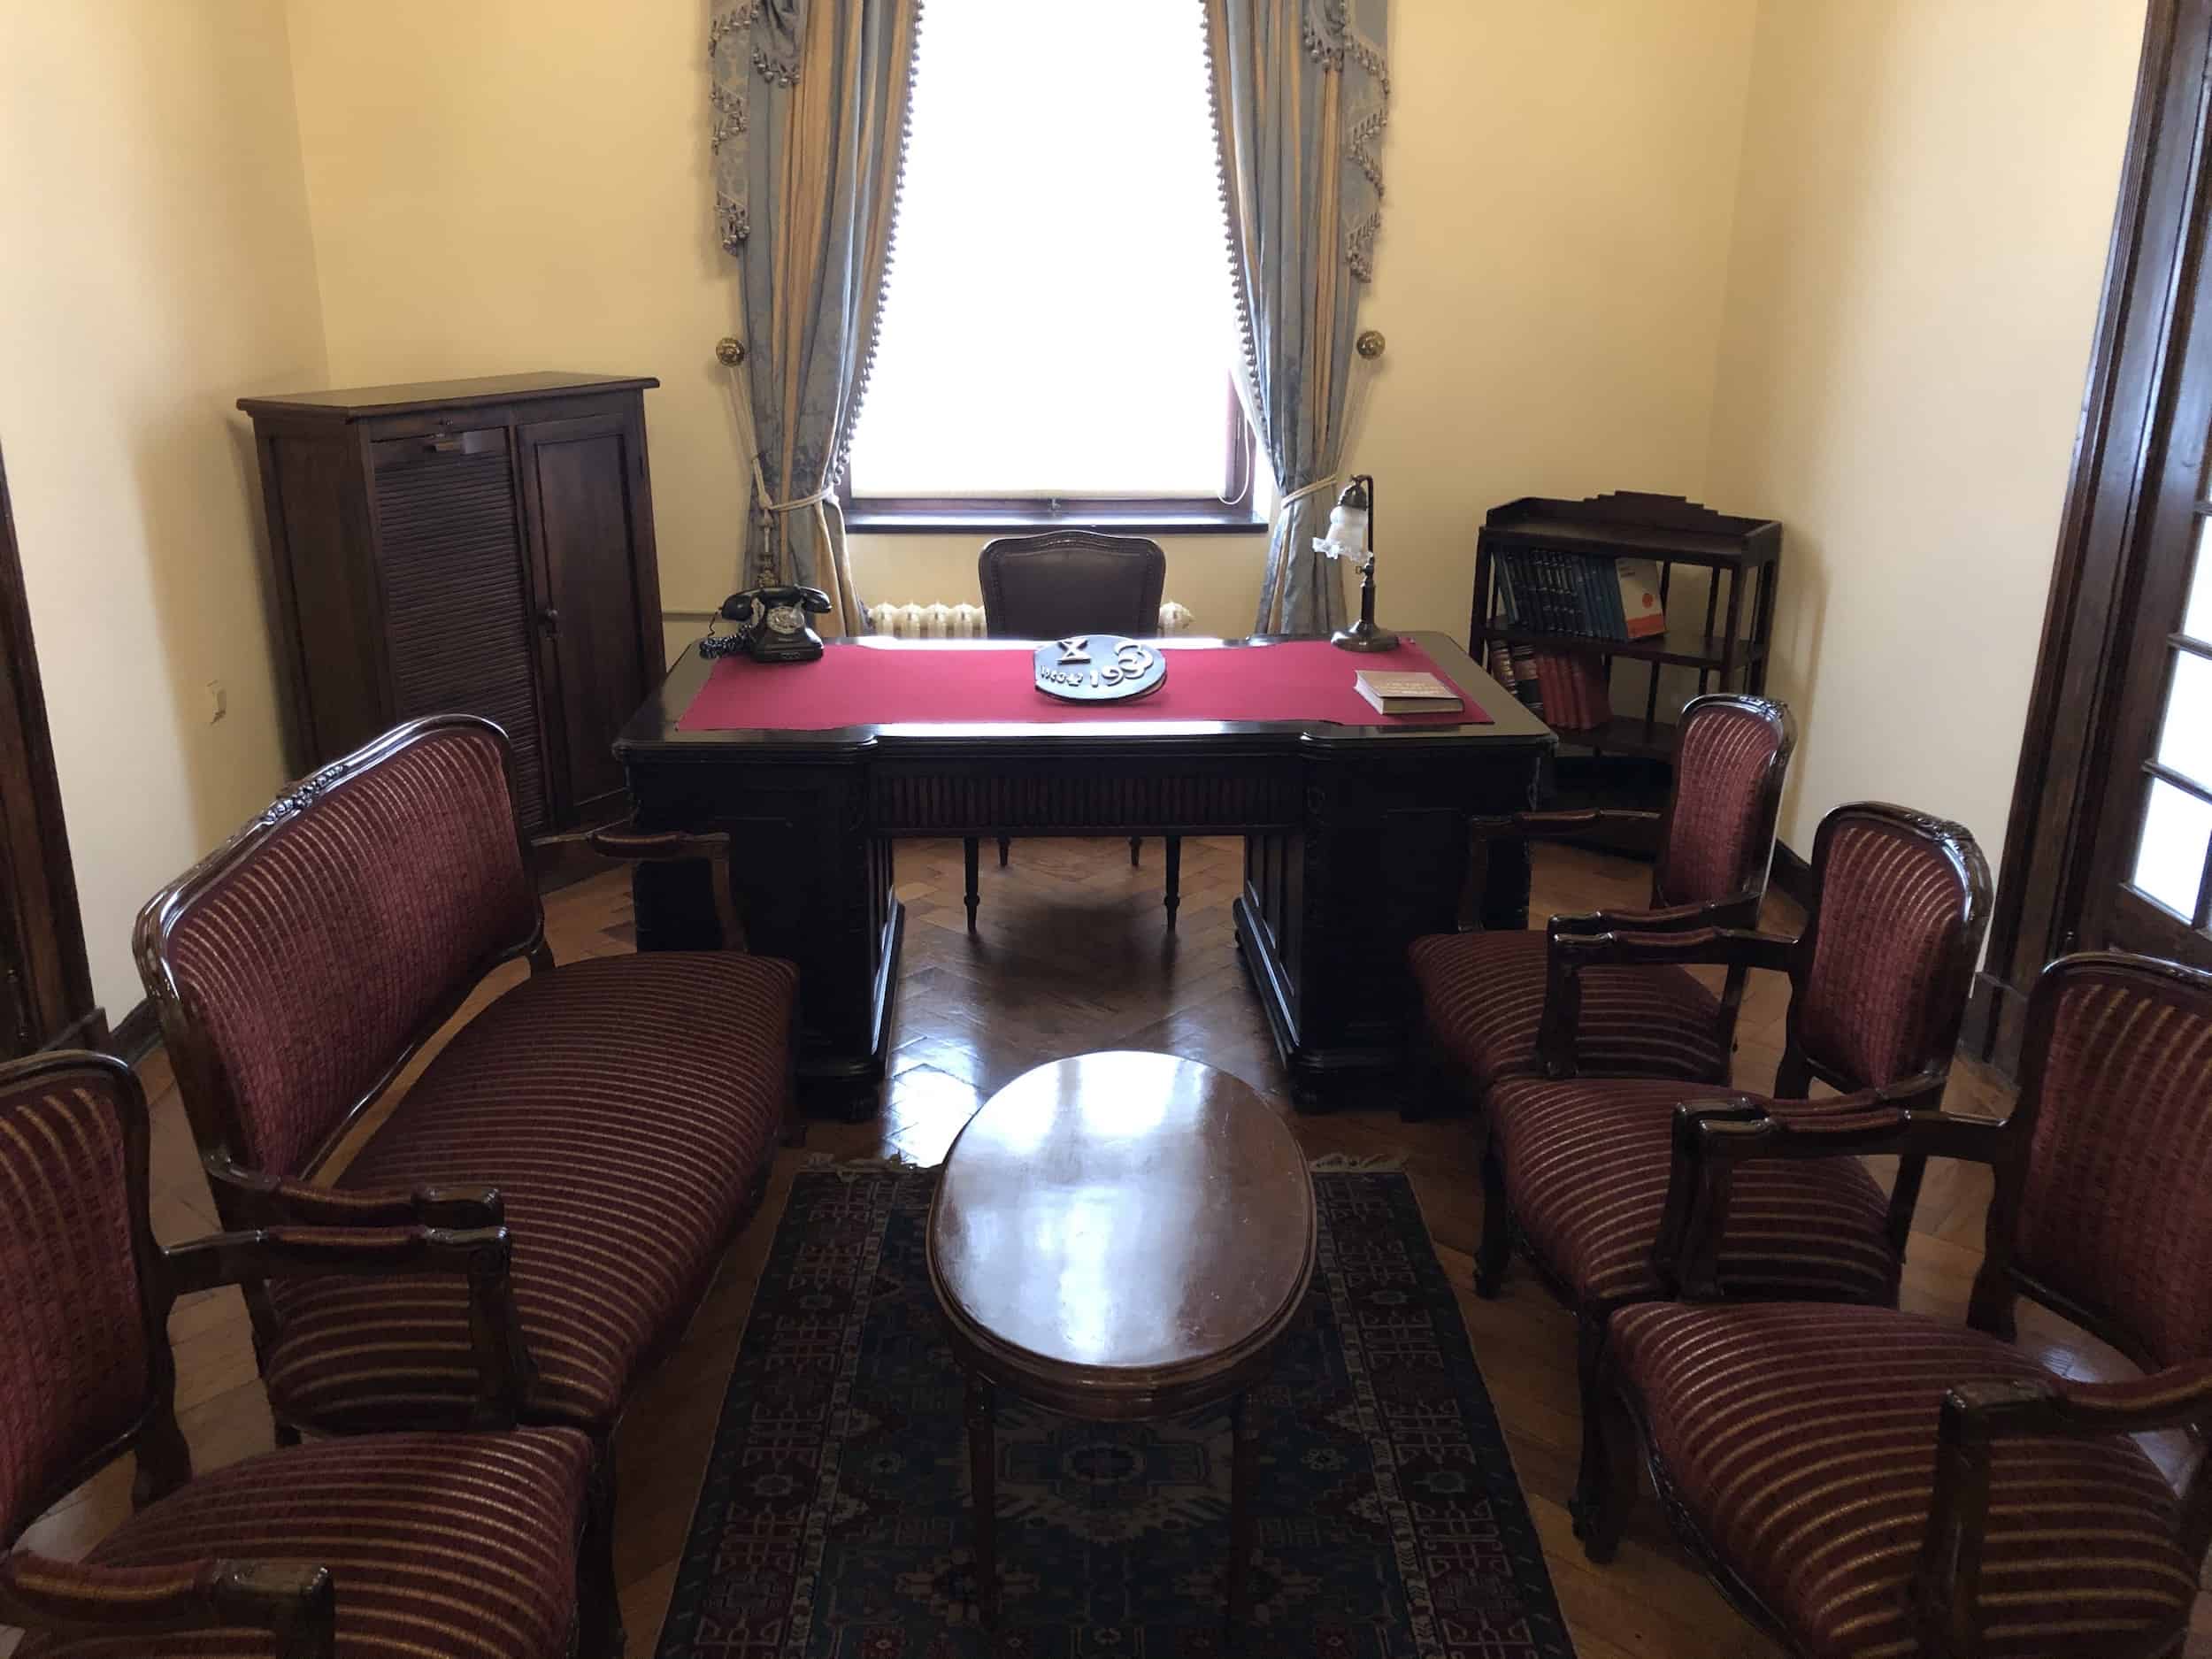 President's Study at the Republic Museum at the Second Grand National Assembly of Turkey in Ulus, Ankara, Turkey